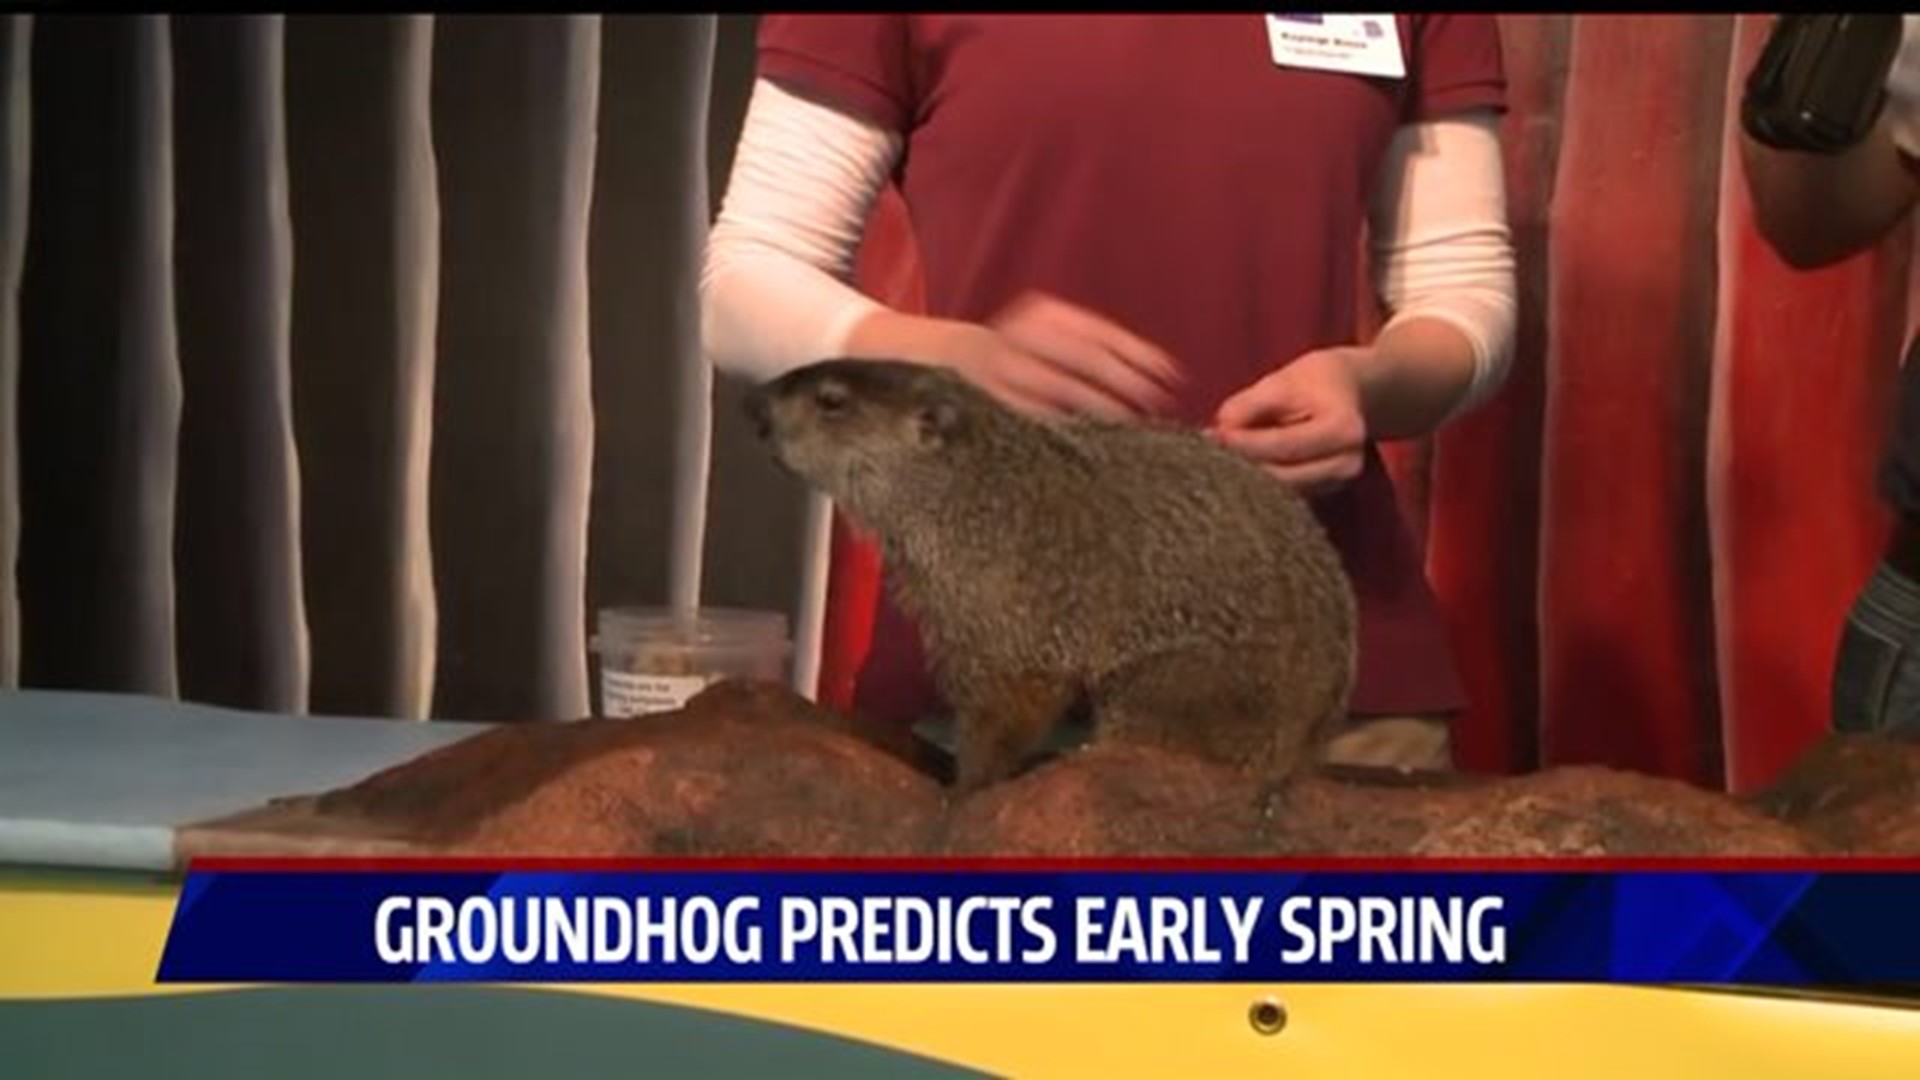 Early spring predicted by Connecticut groundhog